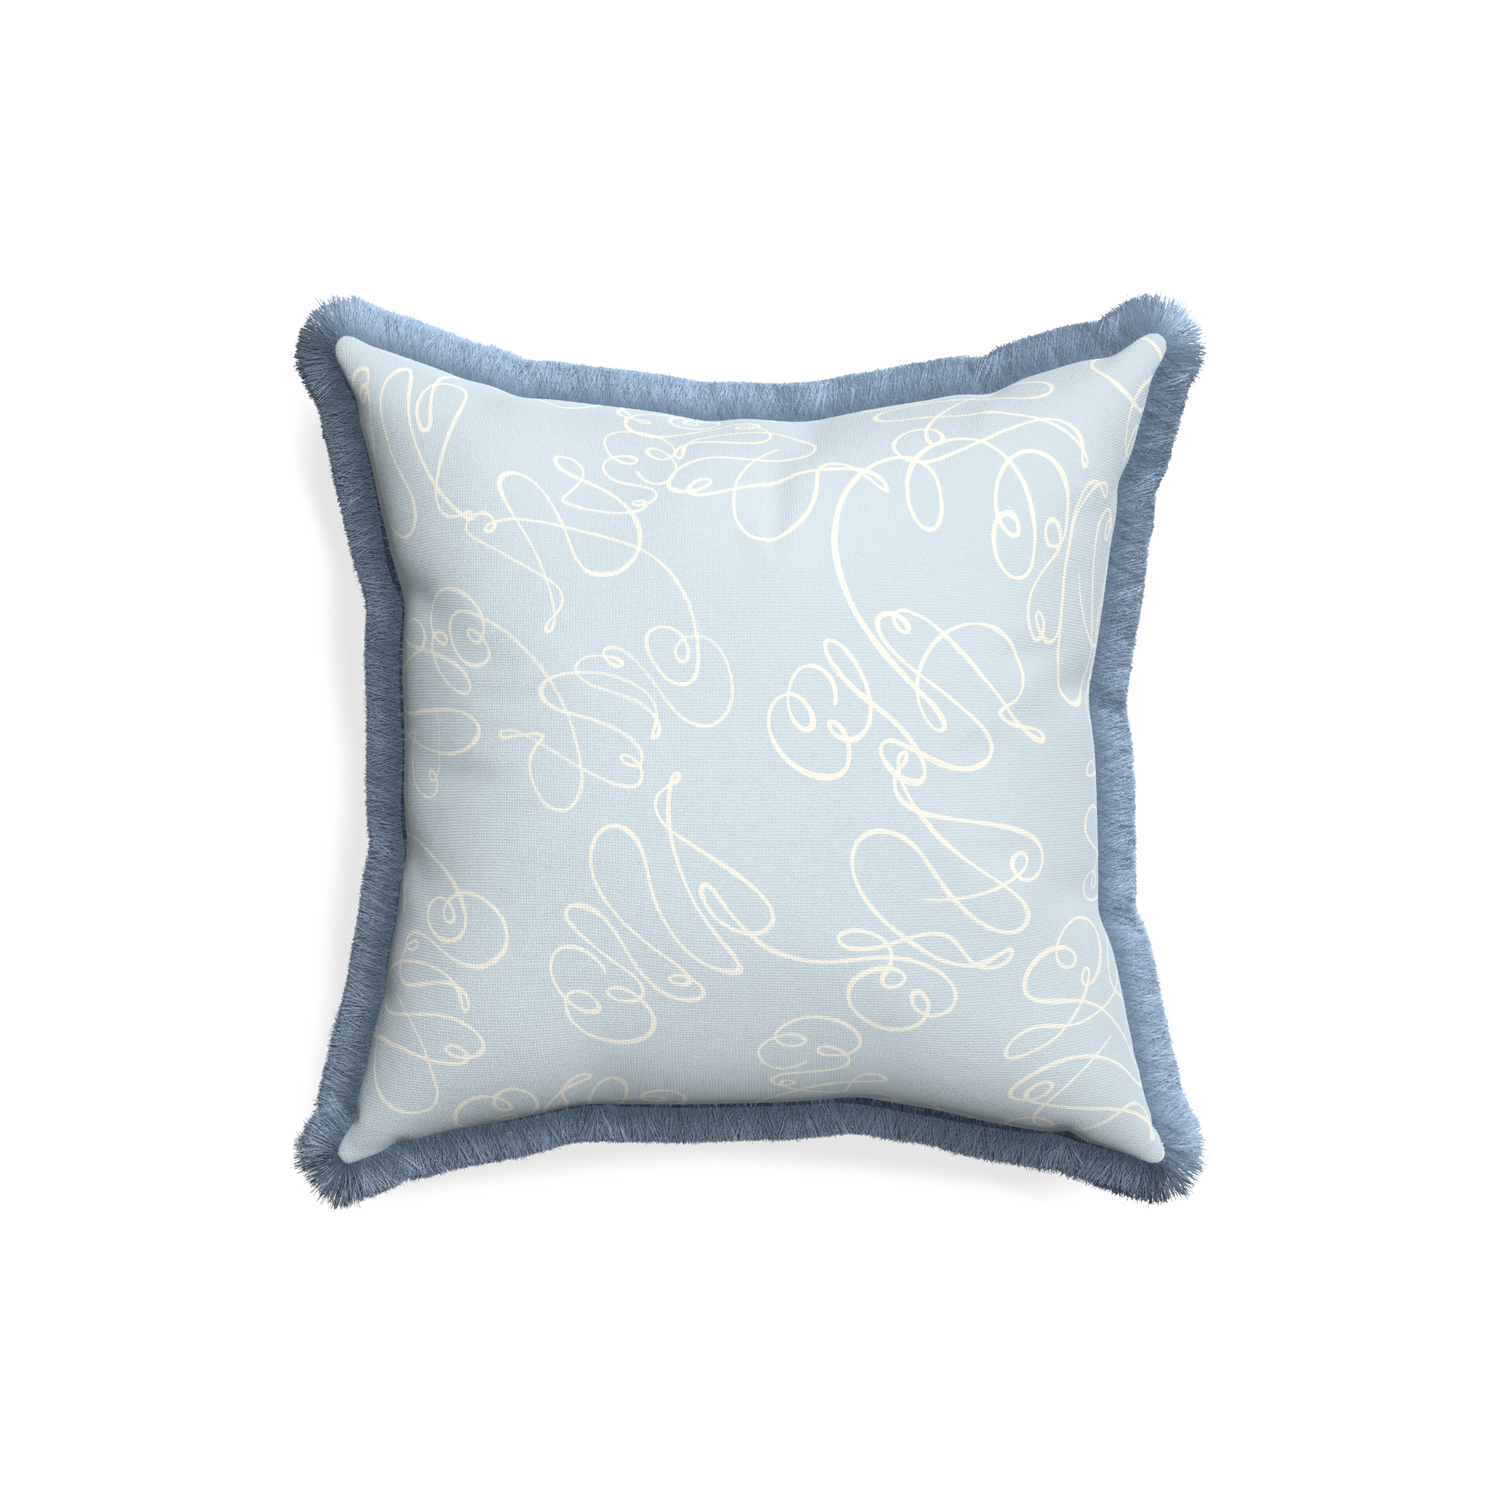 18-square mirabella custom pillow with sky fringe on white background